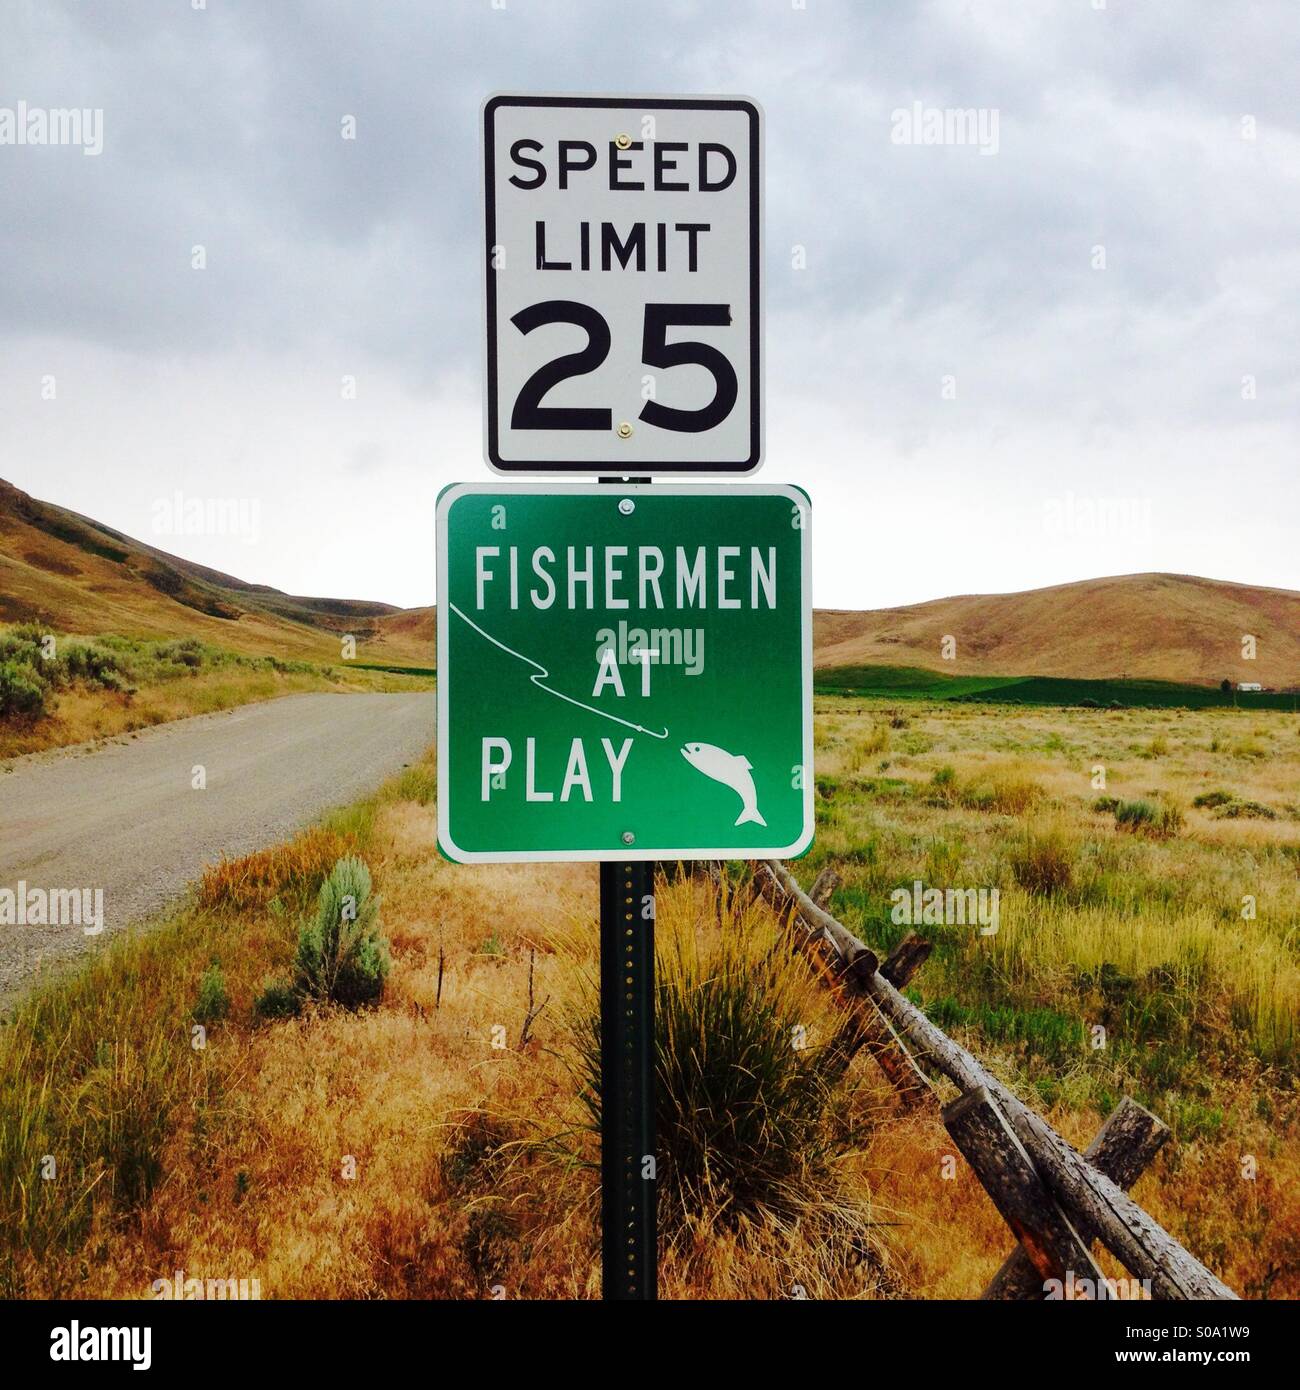 Slow down we're fishing Stock Photo